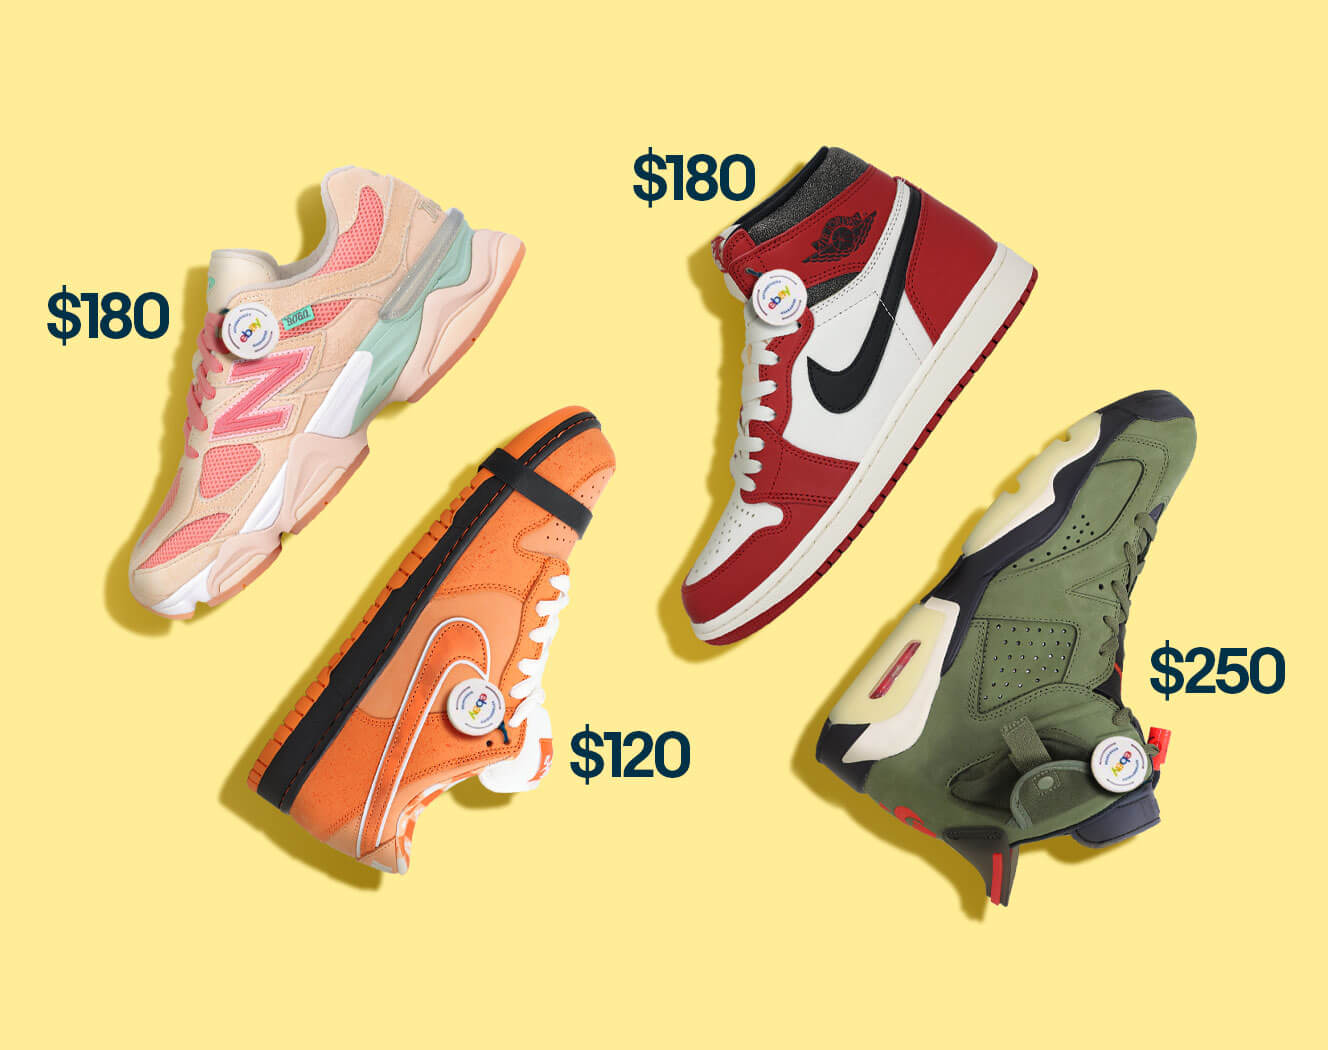 $180 New Balance 9060 Joe Fresh Goods Inside Voices Penny Cookie Pink, $120 Nike Dunk SB Orange Lobster, $180 New Balance 9060 Joe Fresh Goods Inside Voices Penny Cookie Pink, and $250 Jordan 6 Retro Travis Scott Olive Green sneakers on a light yellow background.